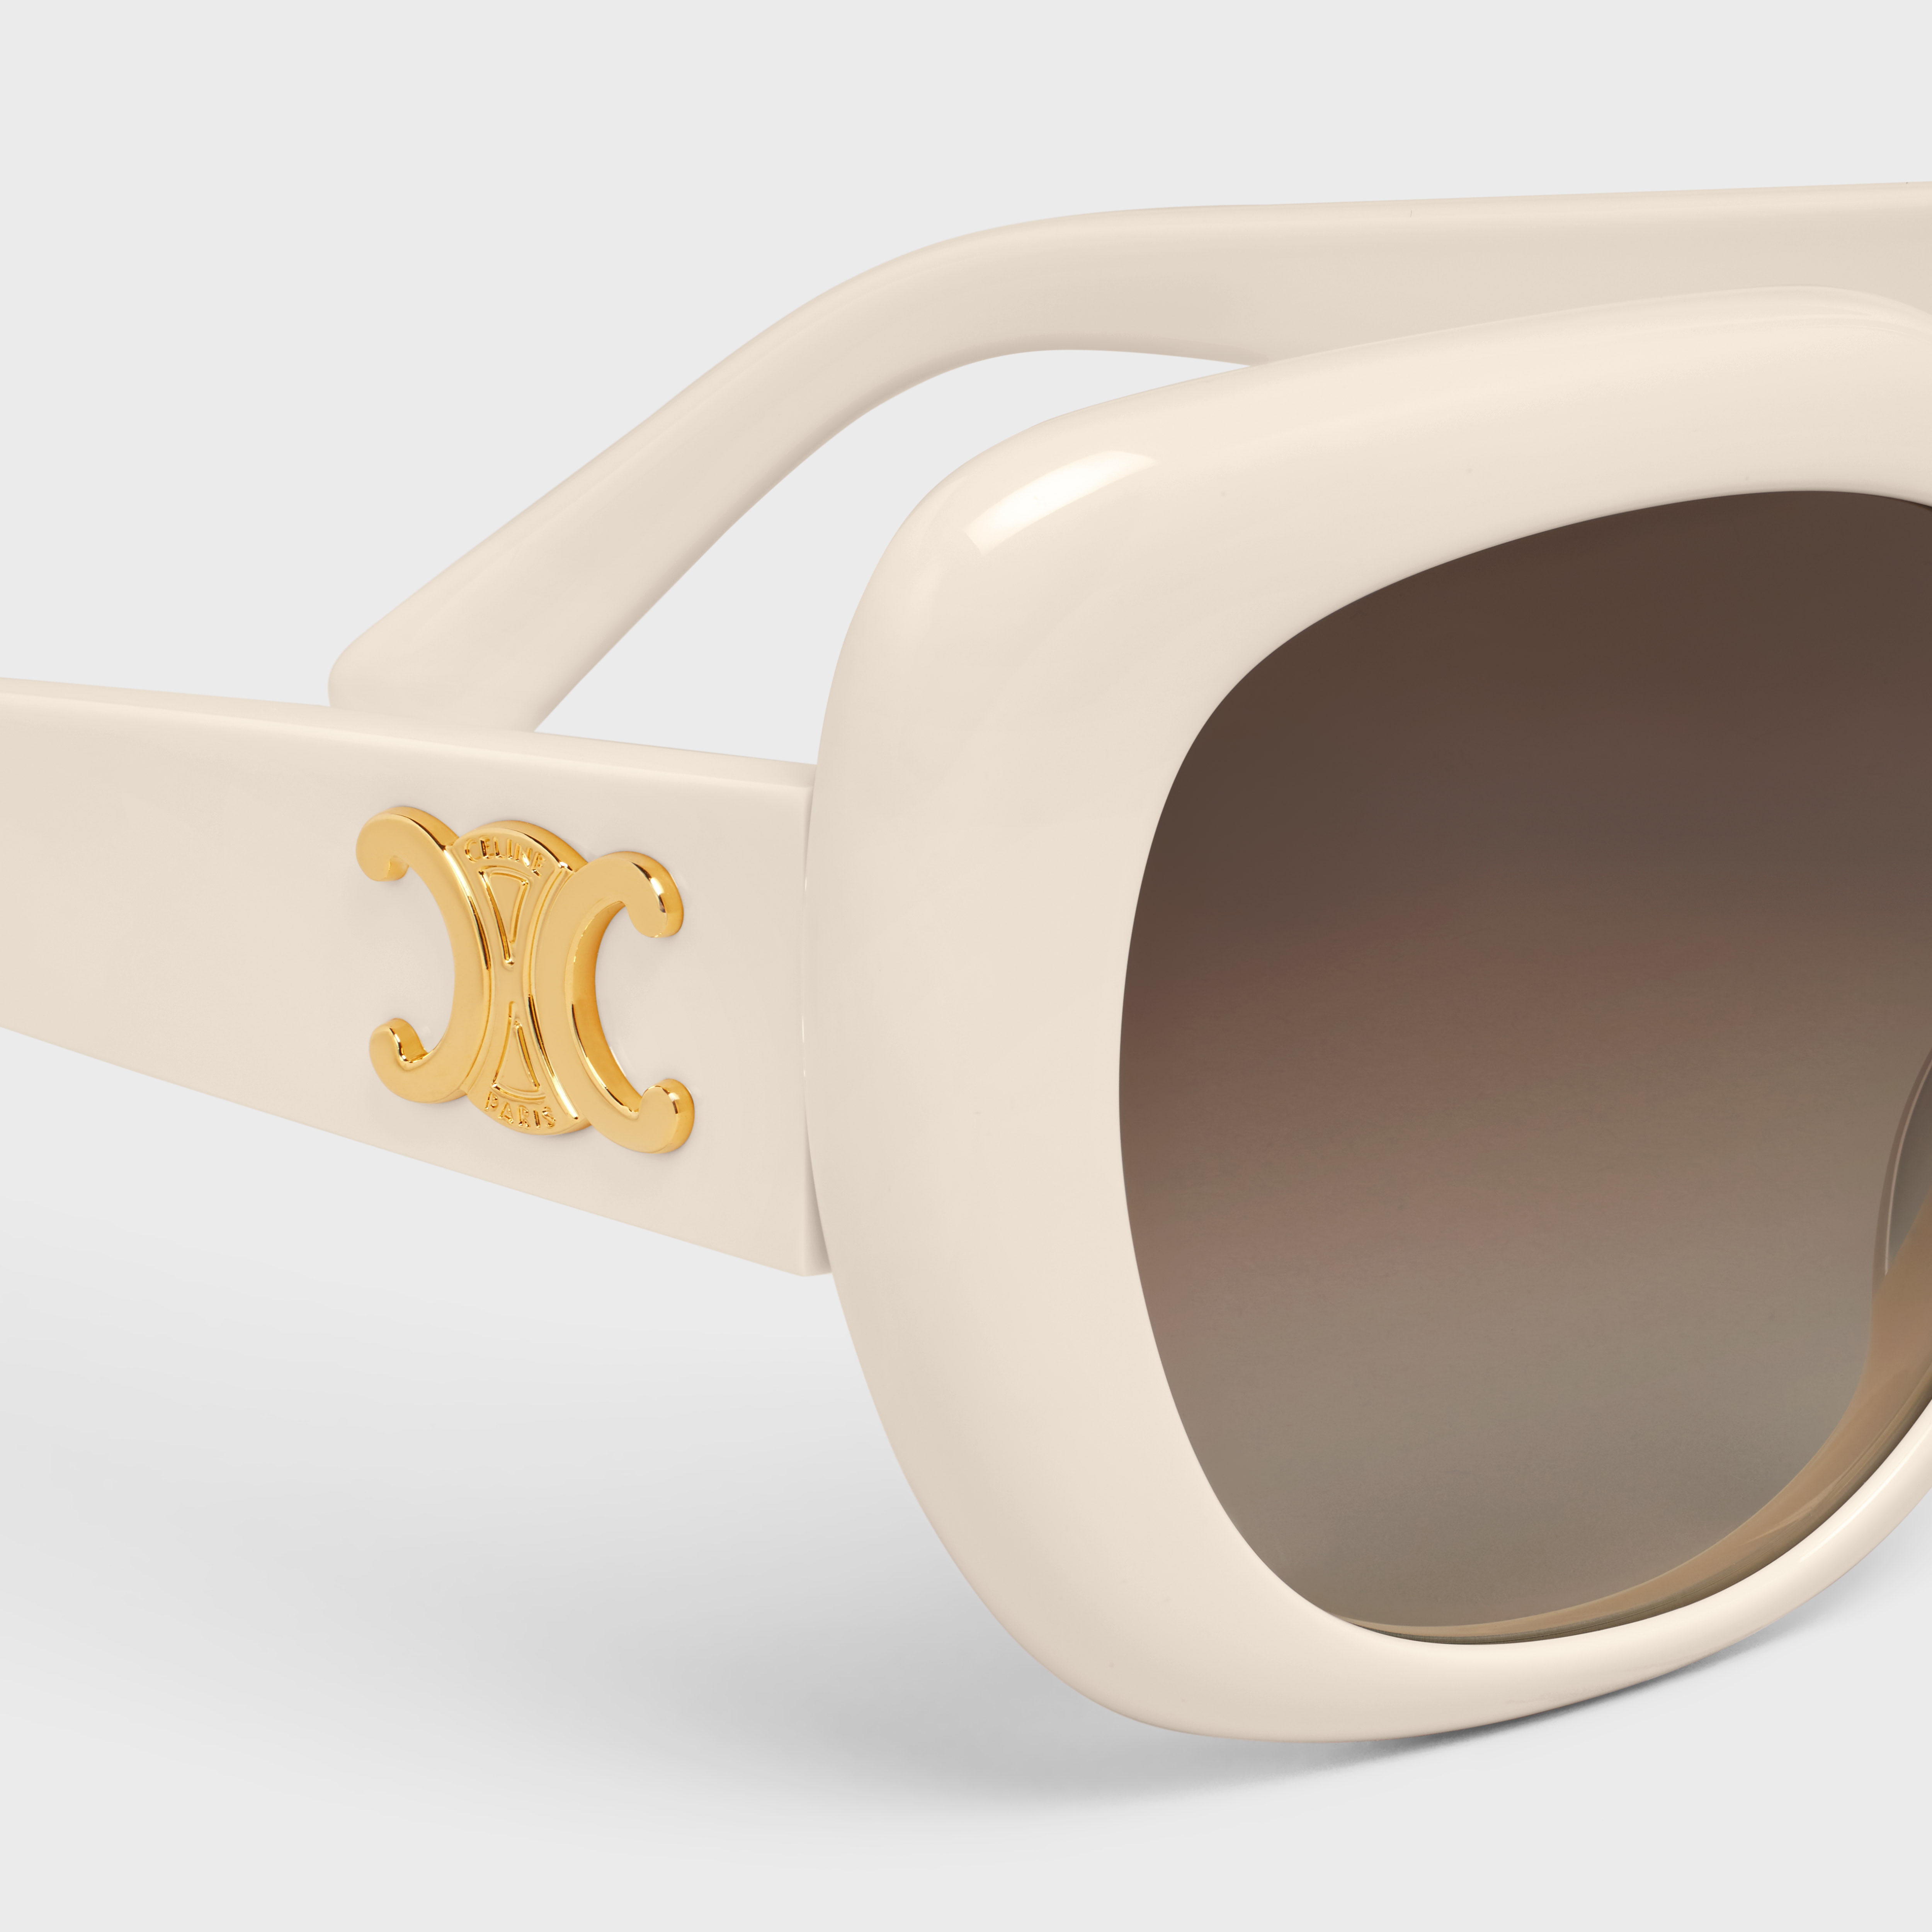 MẮT KÍNH NỮ CELINE TRIOMPHE 06 SUNGLASSES IN IVORY SQUARE ACETATE 8